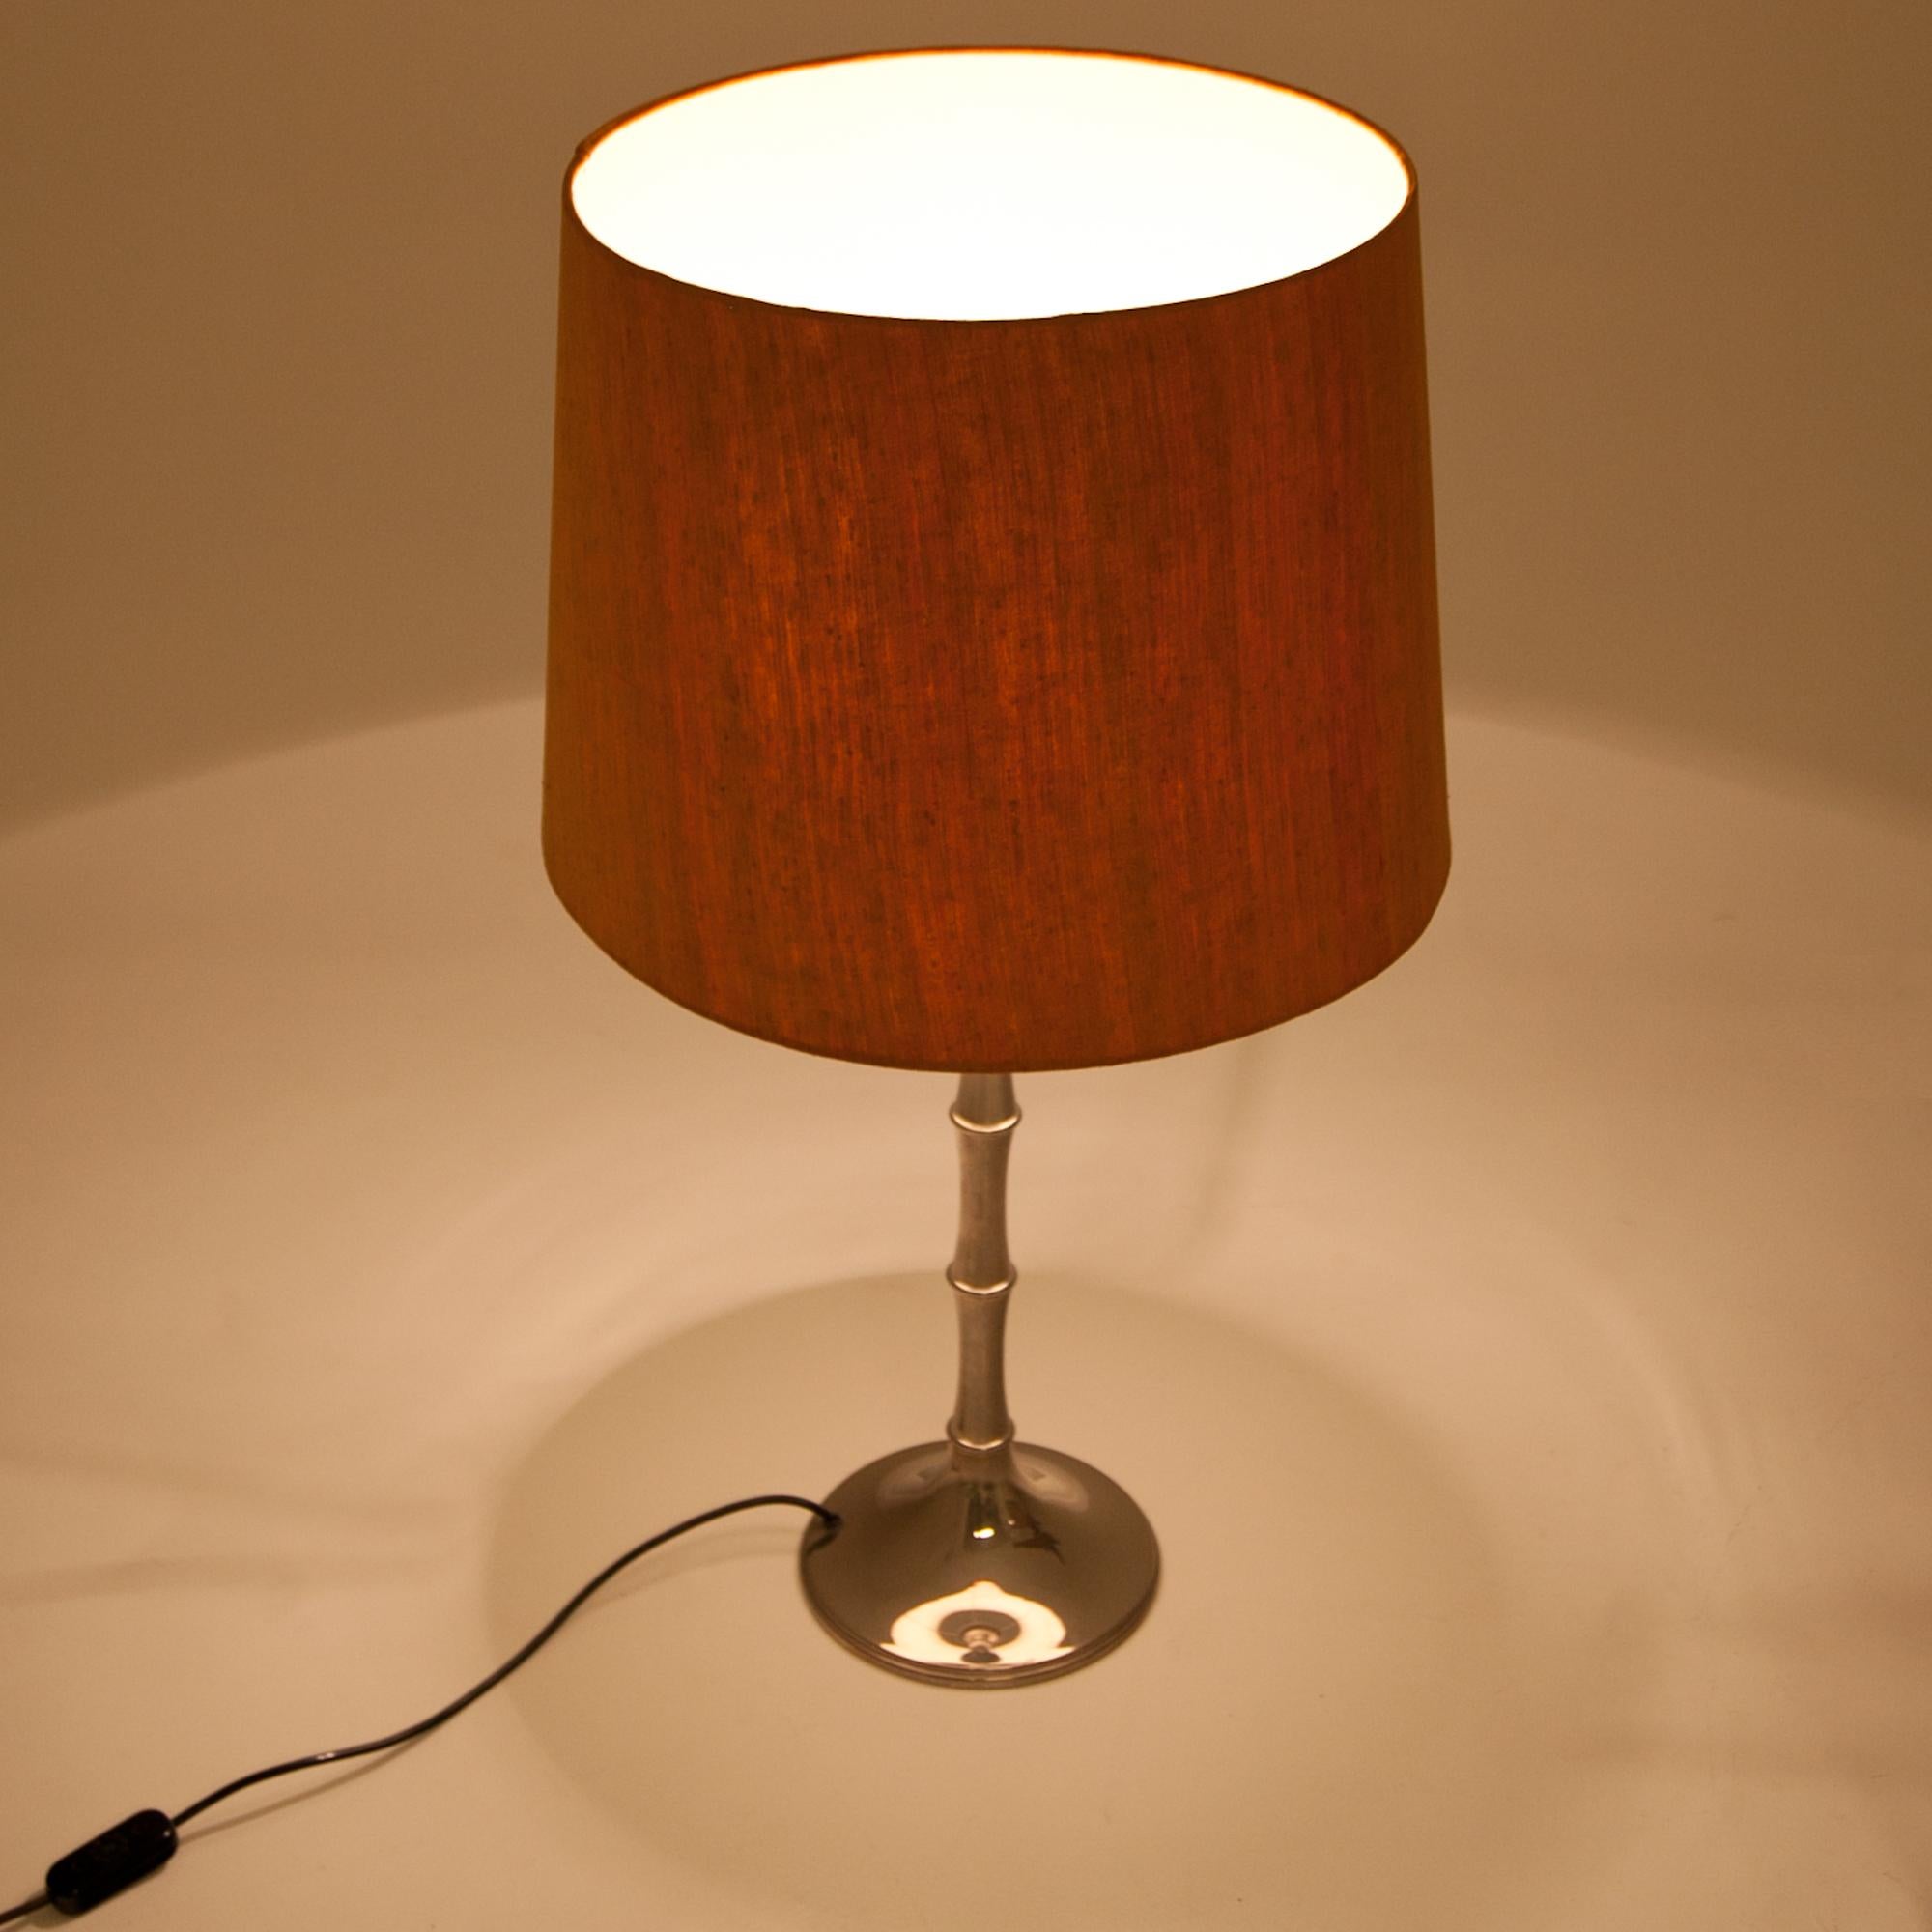 Late 20th Century Bamboo Lamp, Design by Ingo Mauer, Germany, 1970s